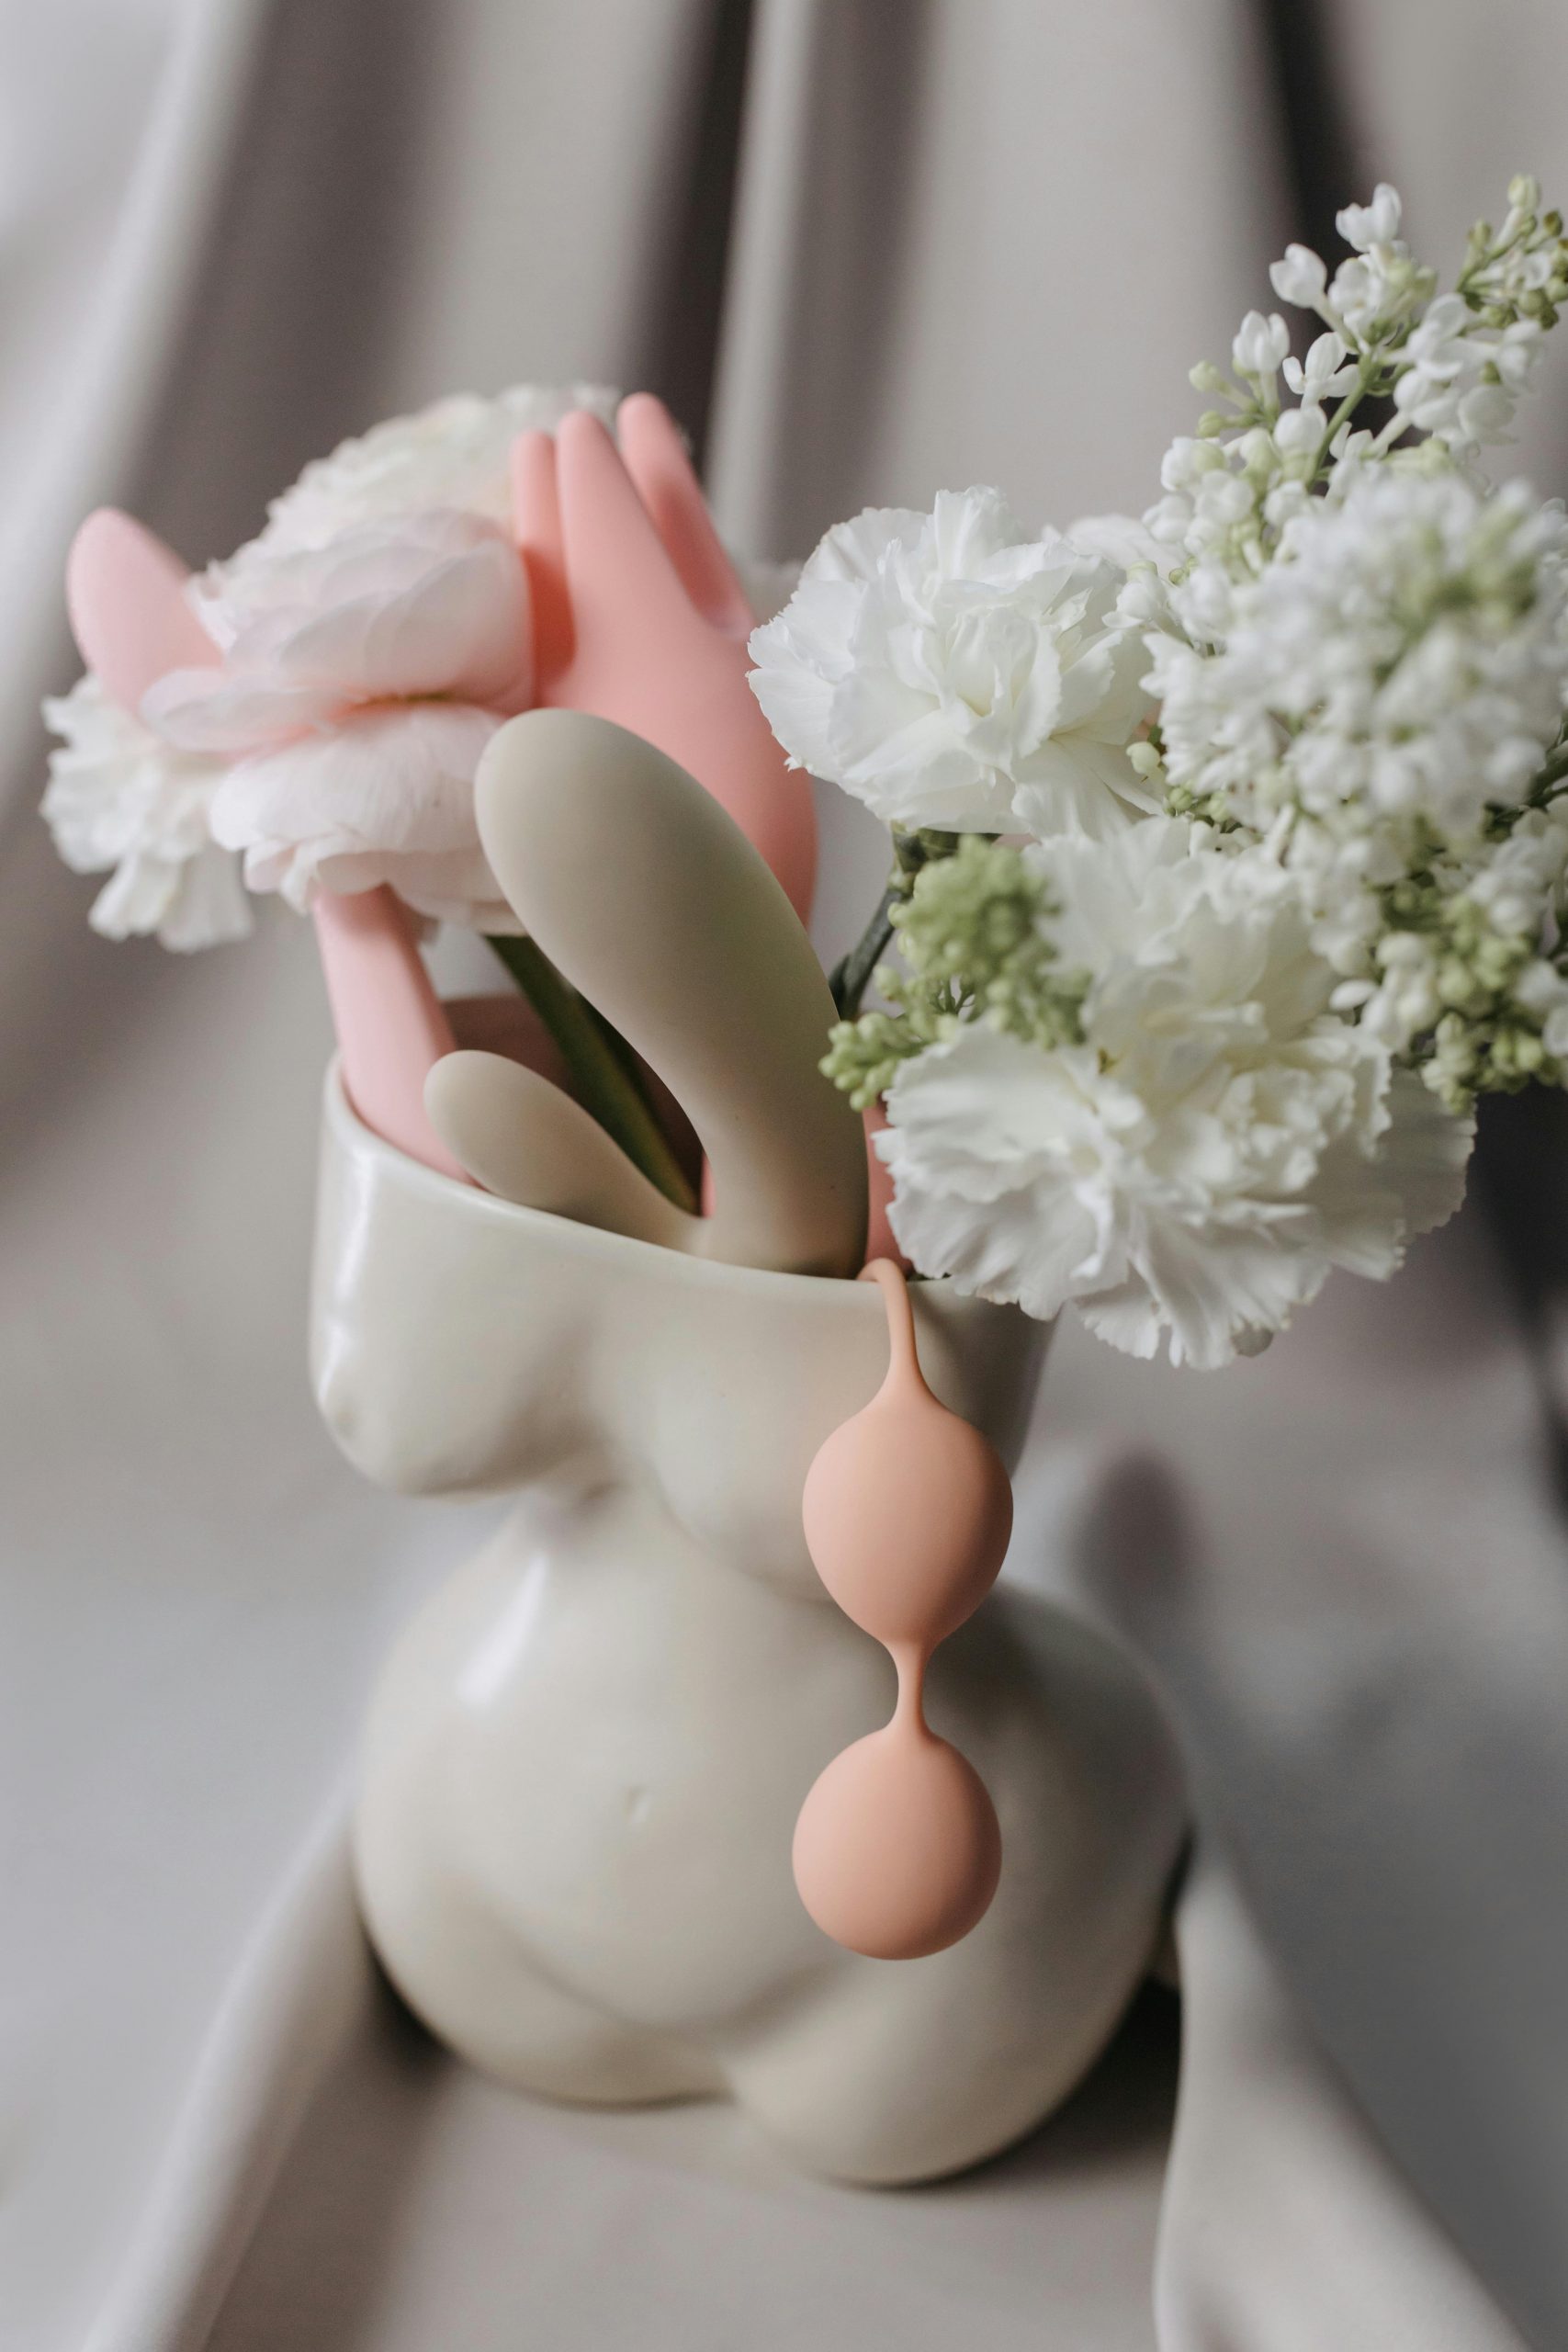 sex toys and flowers in woman body sculpture vase